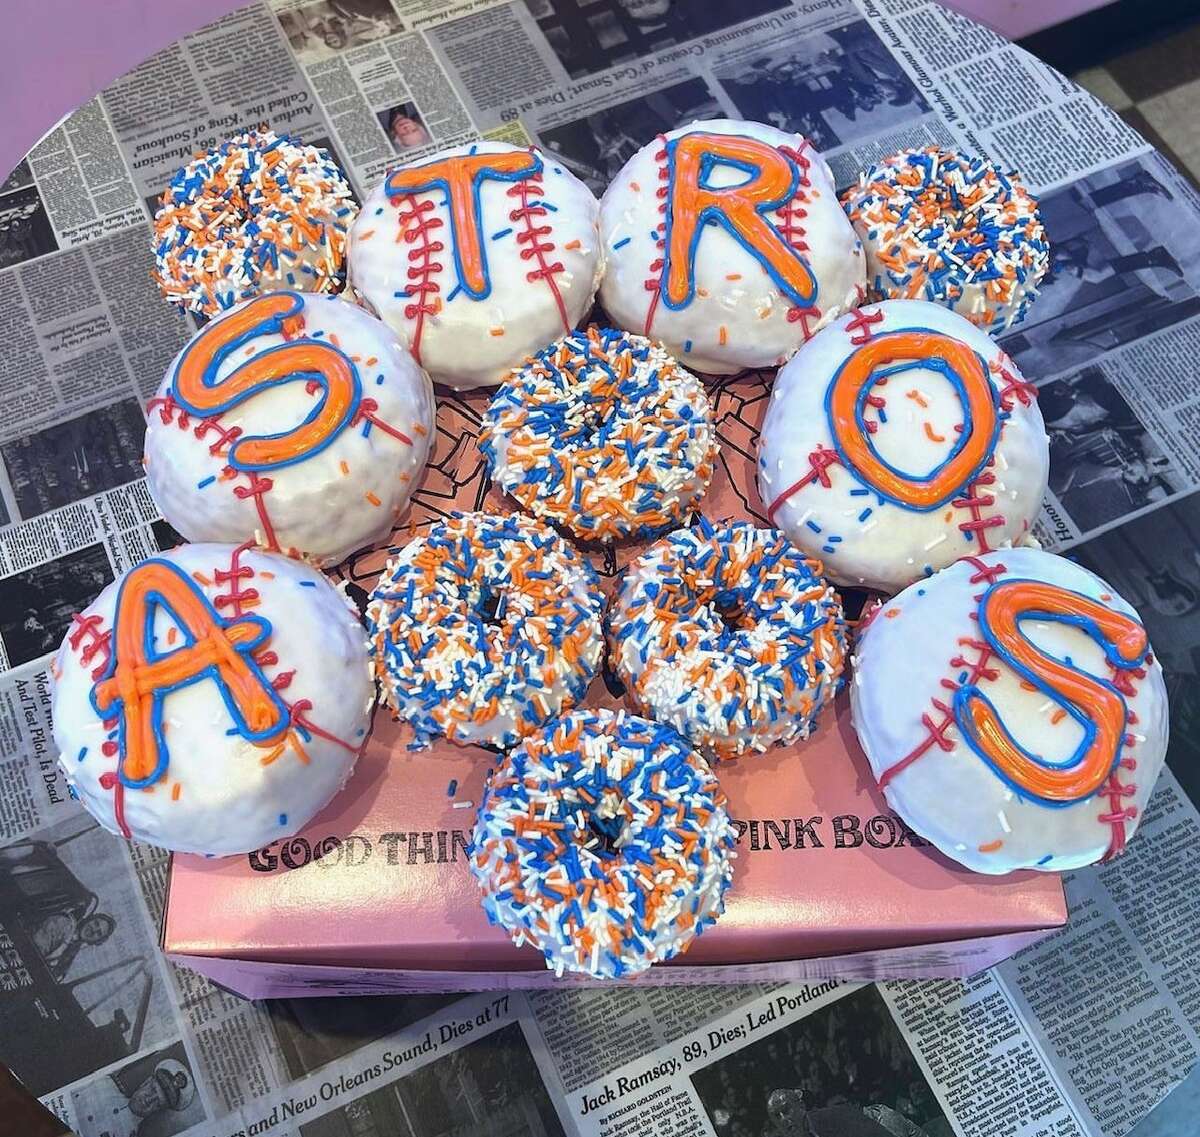 Voodoo Doughnut sold Astros-themed sprinkle cakes as part of a World Series promotion at select stores during the series.